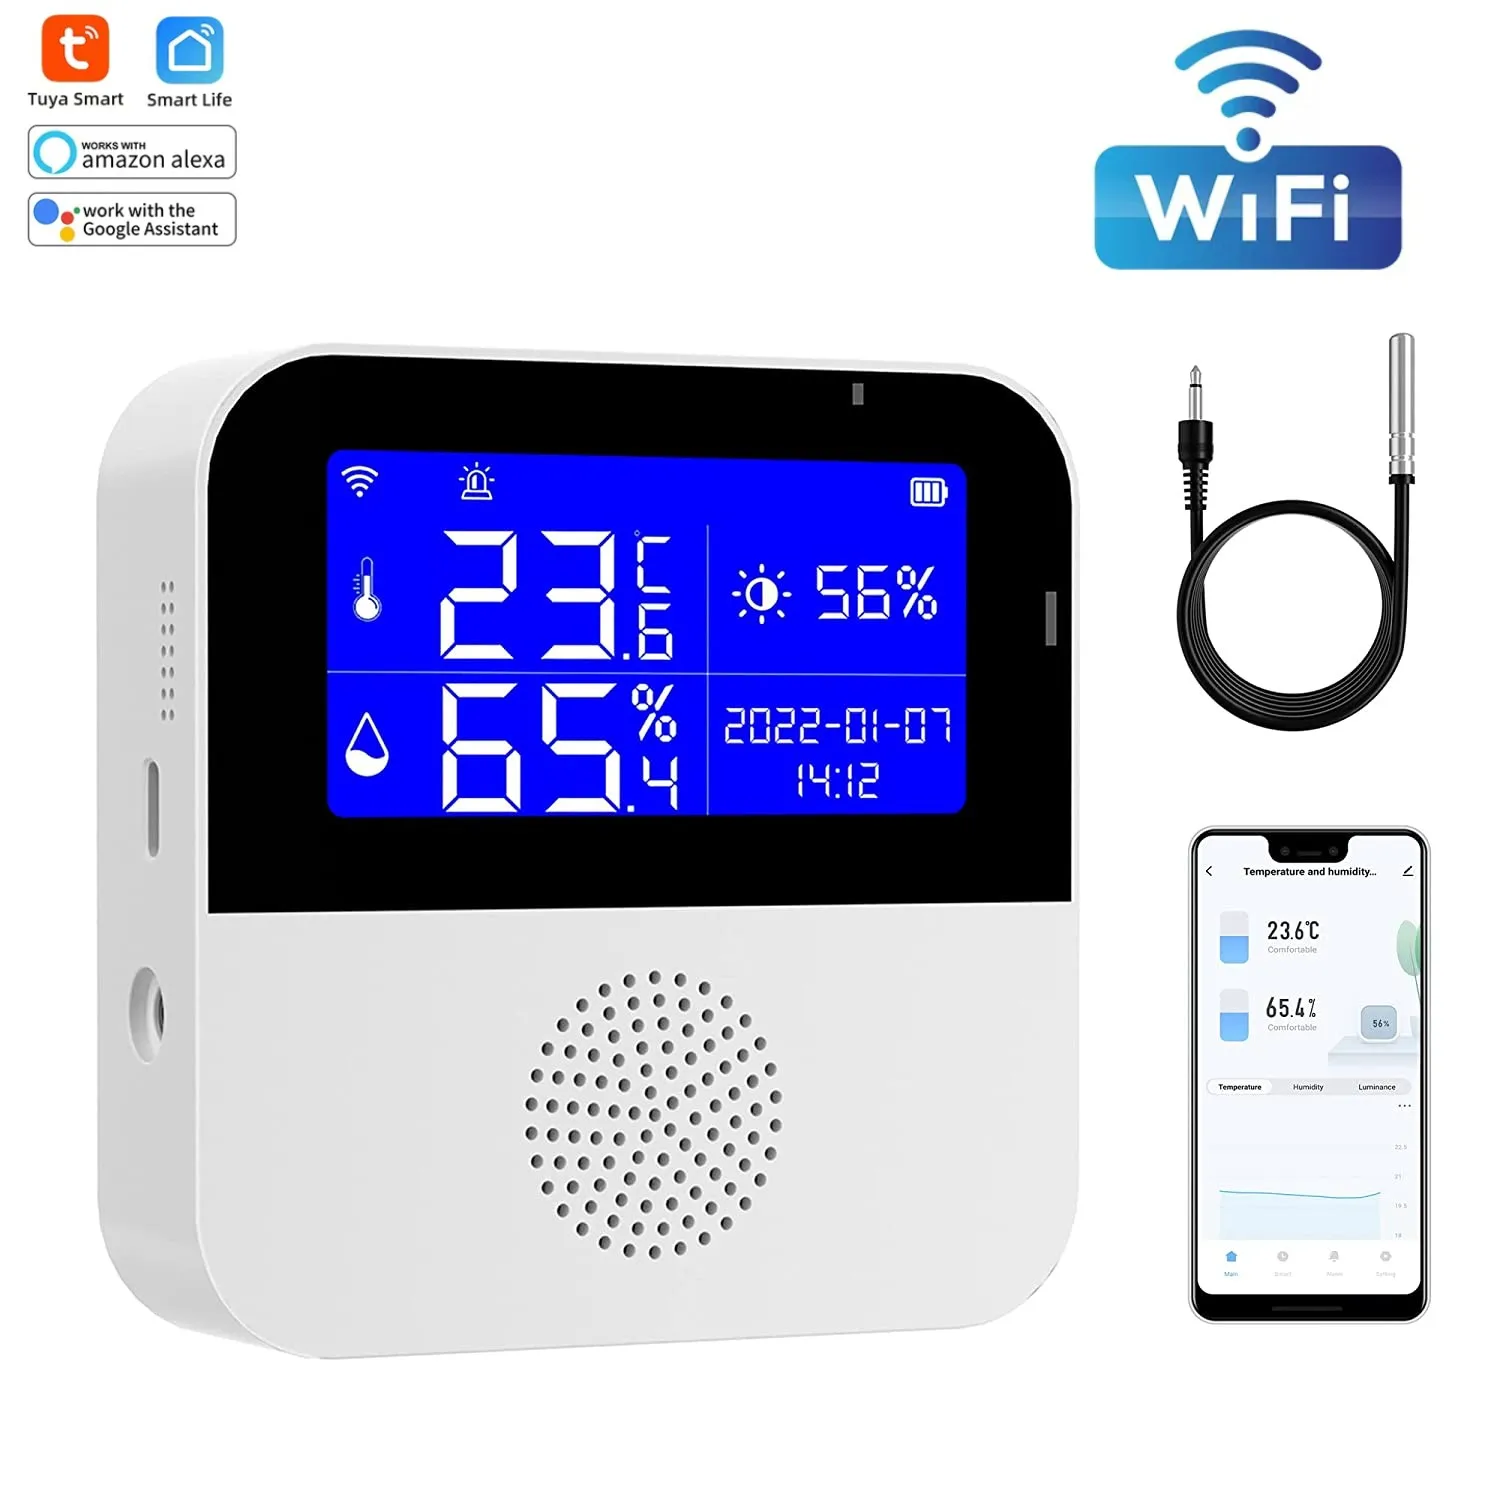 https://ae01.alicdn.com/kf/S425ca40903d041ef946cda42b1926f71r/Tuya-WiFi-Indoor-Thermometer-Hygrometer-Remote-Monitor-Digital-LCD-Display-Temperature-Humidity-Meter-Support-Google-Assistant.jpg